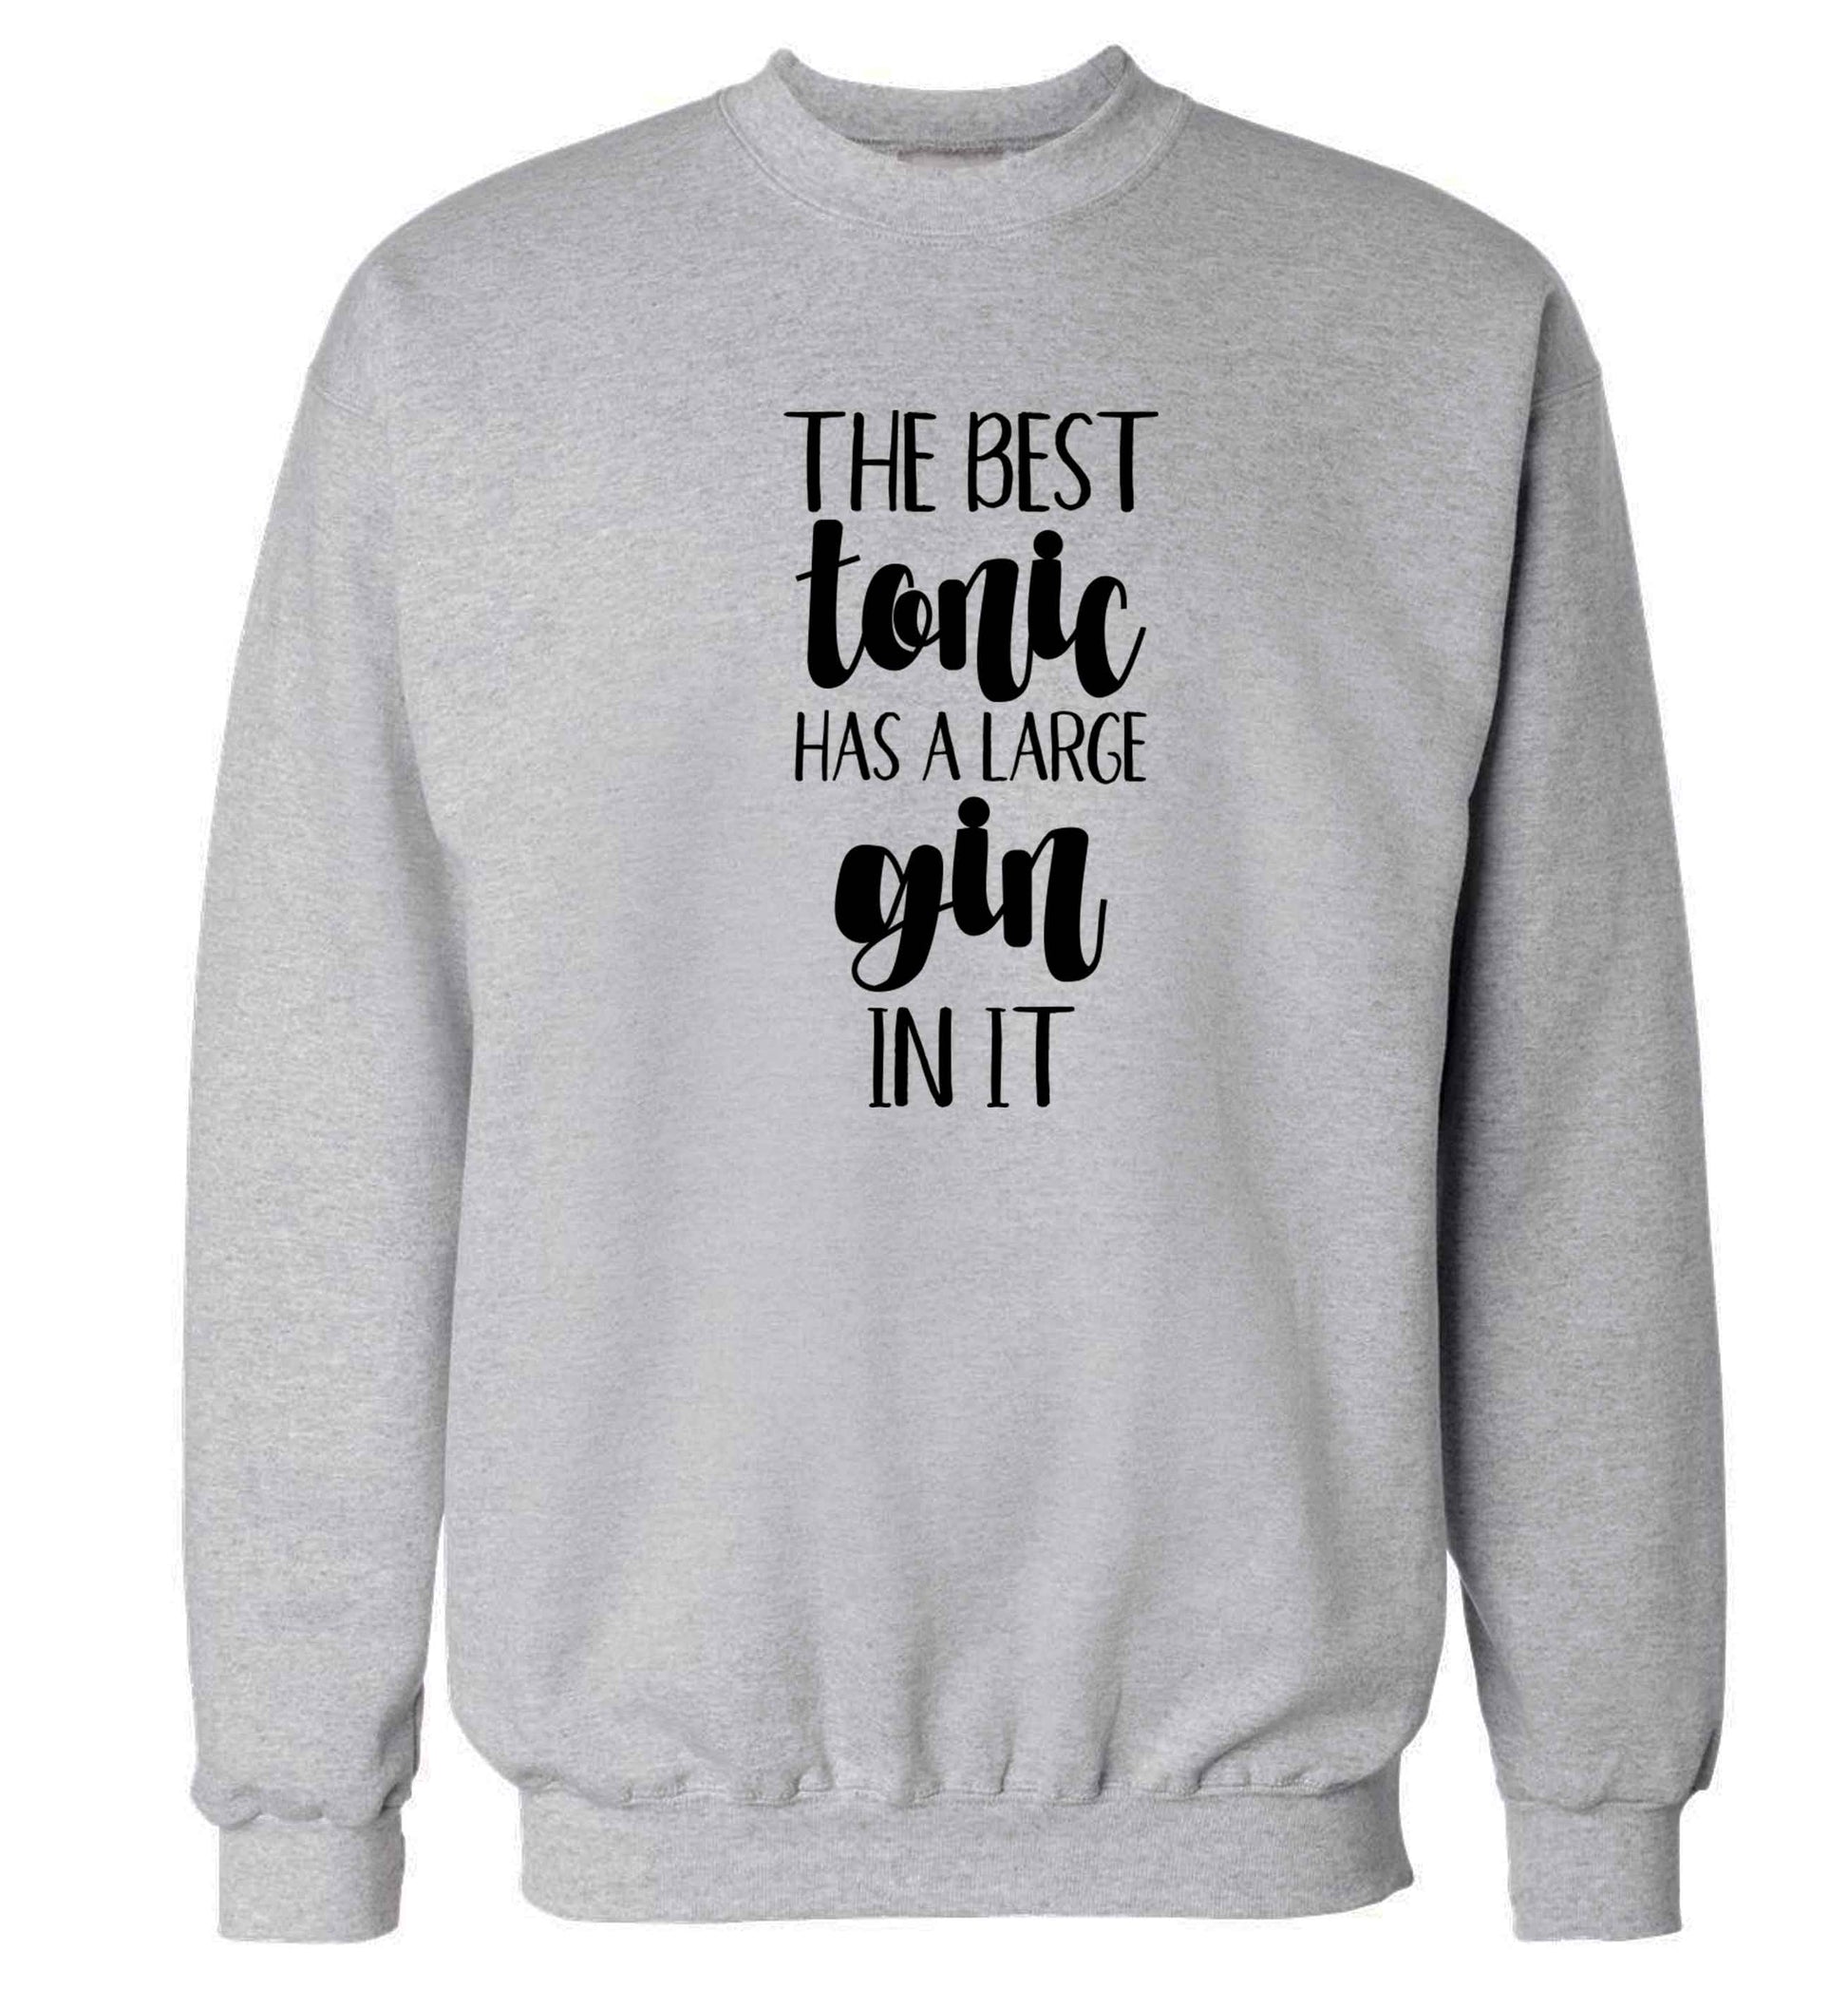 The best tonic has a large gin in it Adult's unisex grey Sweater 2XL